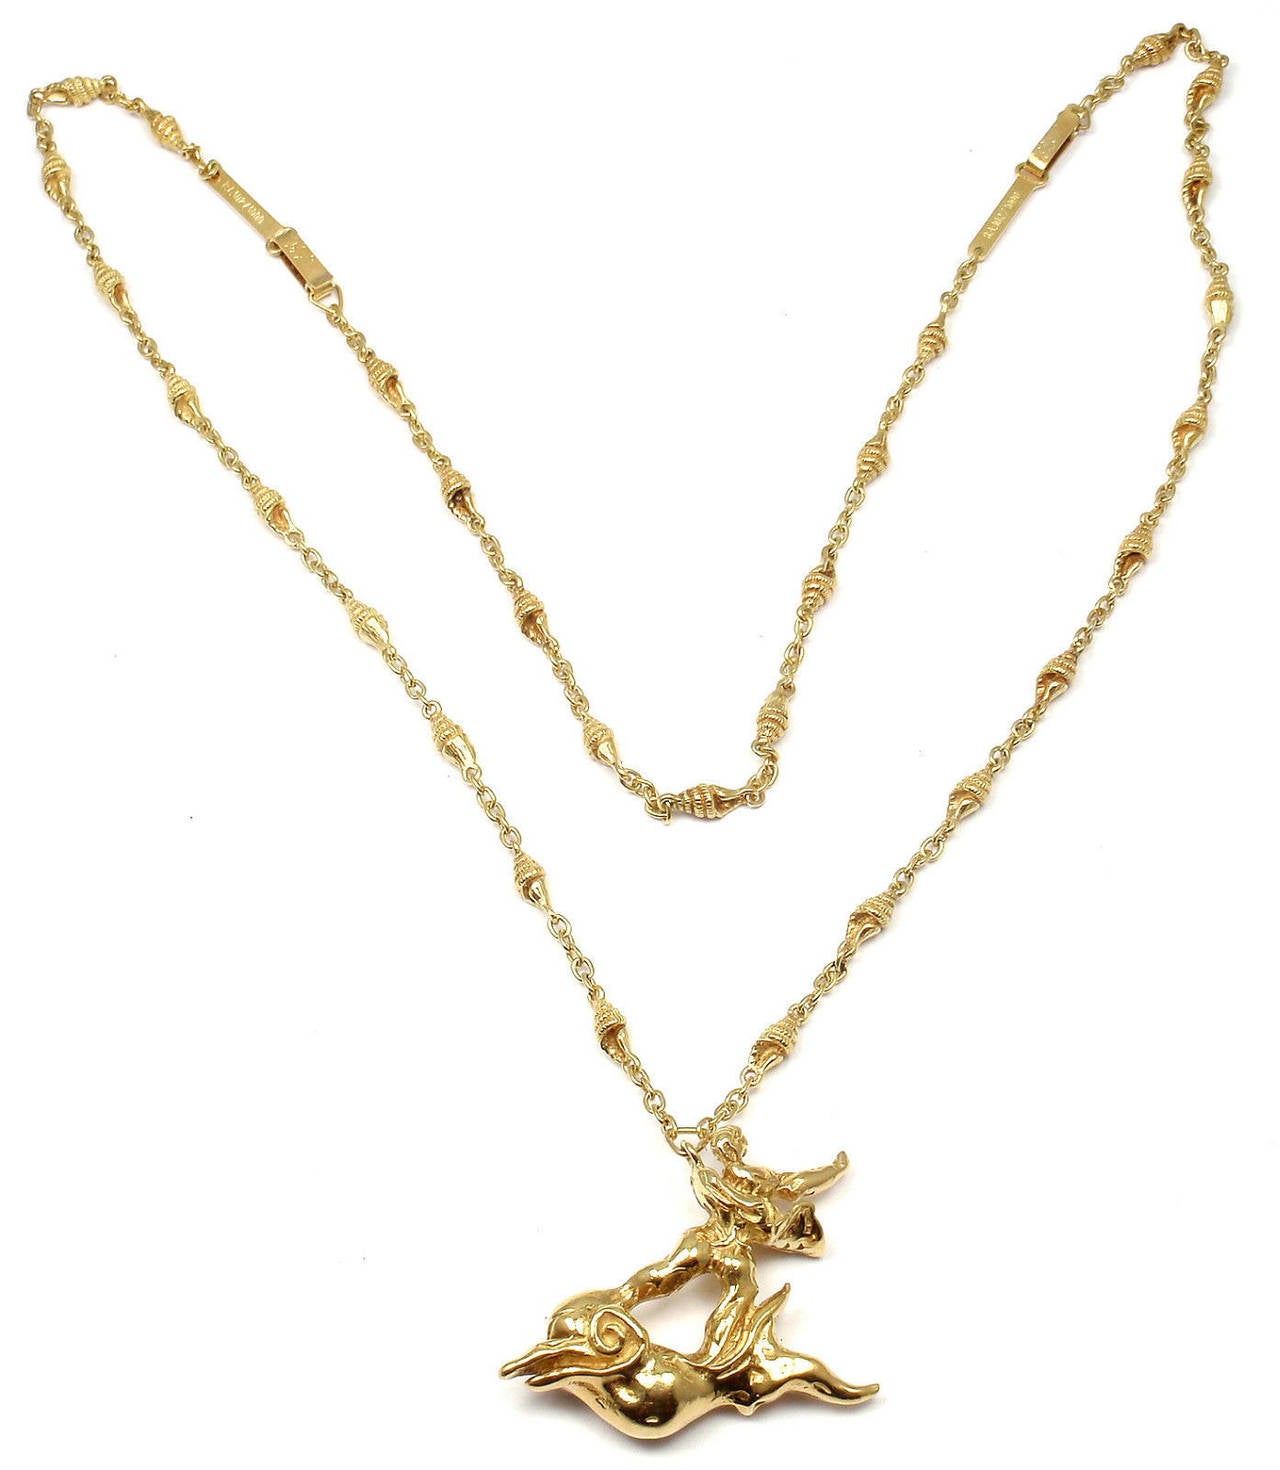 Limited Edition 18k Yellow Gold  Boy And Dolphin Bracelet Necklace Set by Salvador Dali.
This is a limited edition numbered piece from 1970's, number 102 out of 1000 ever made.

Details:
Length: Necklace 24